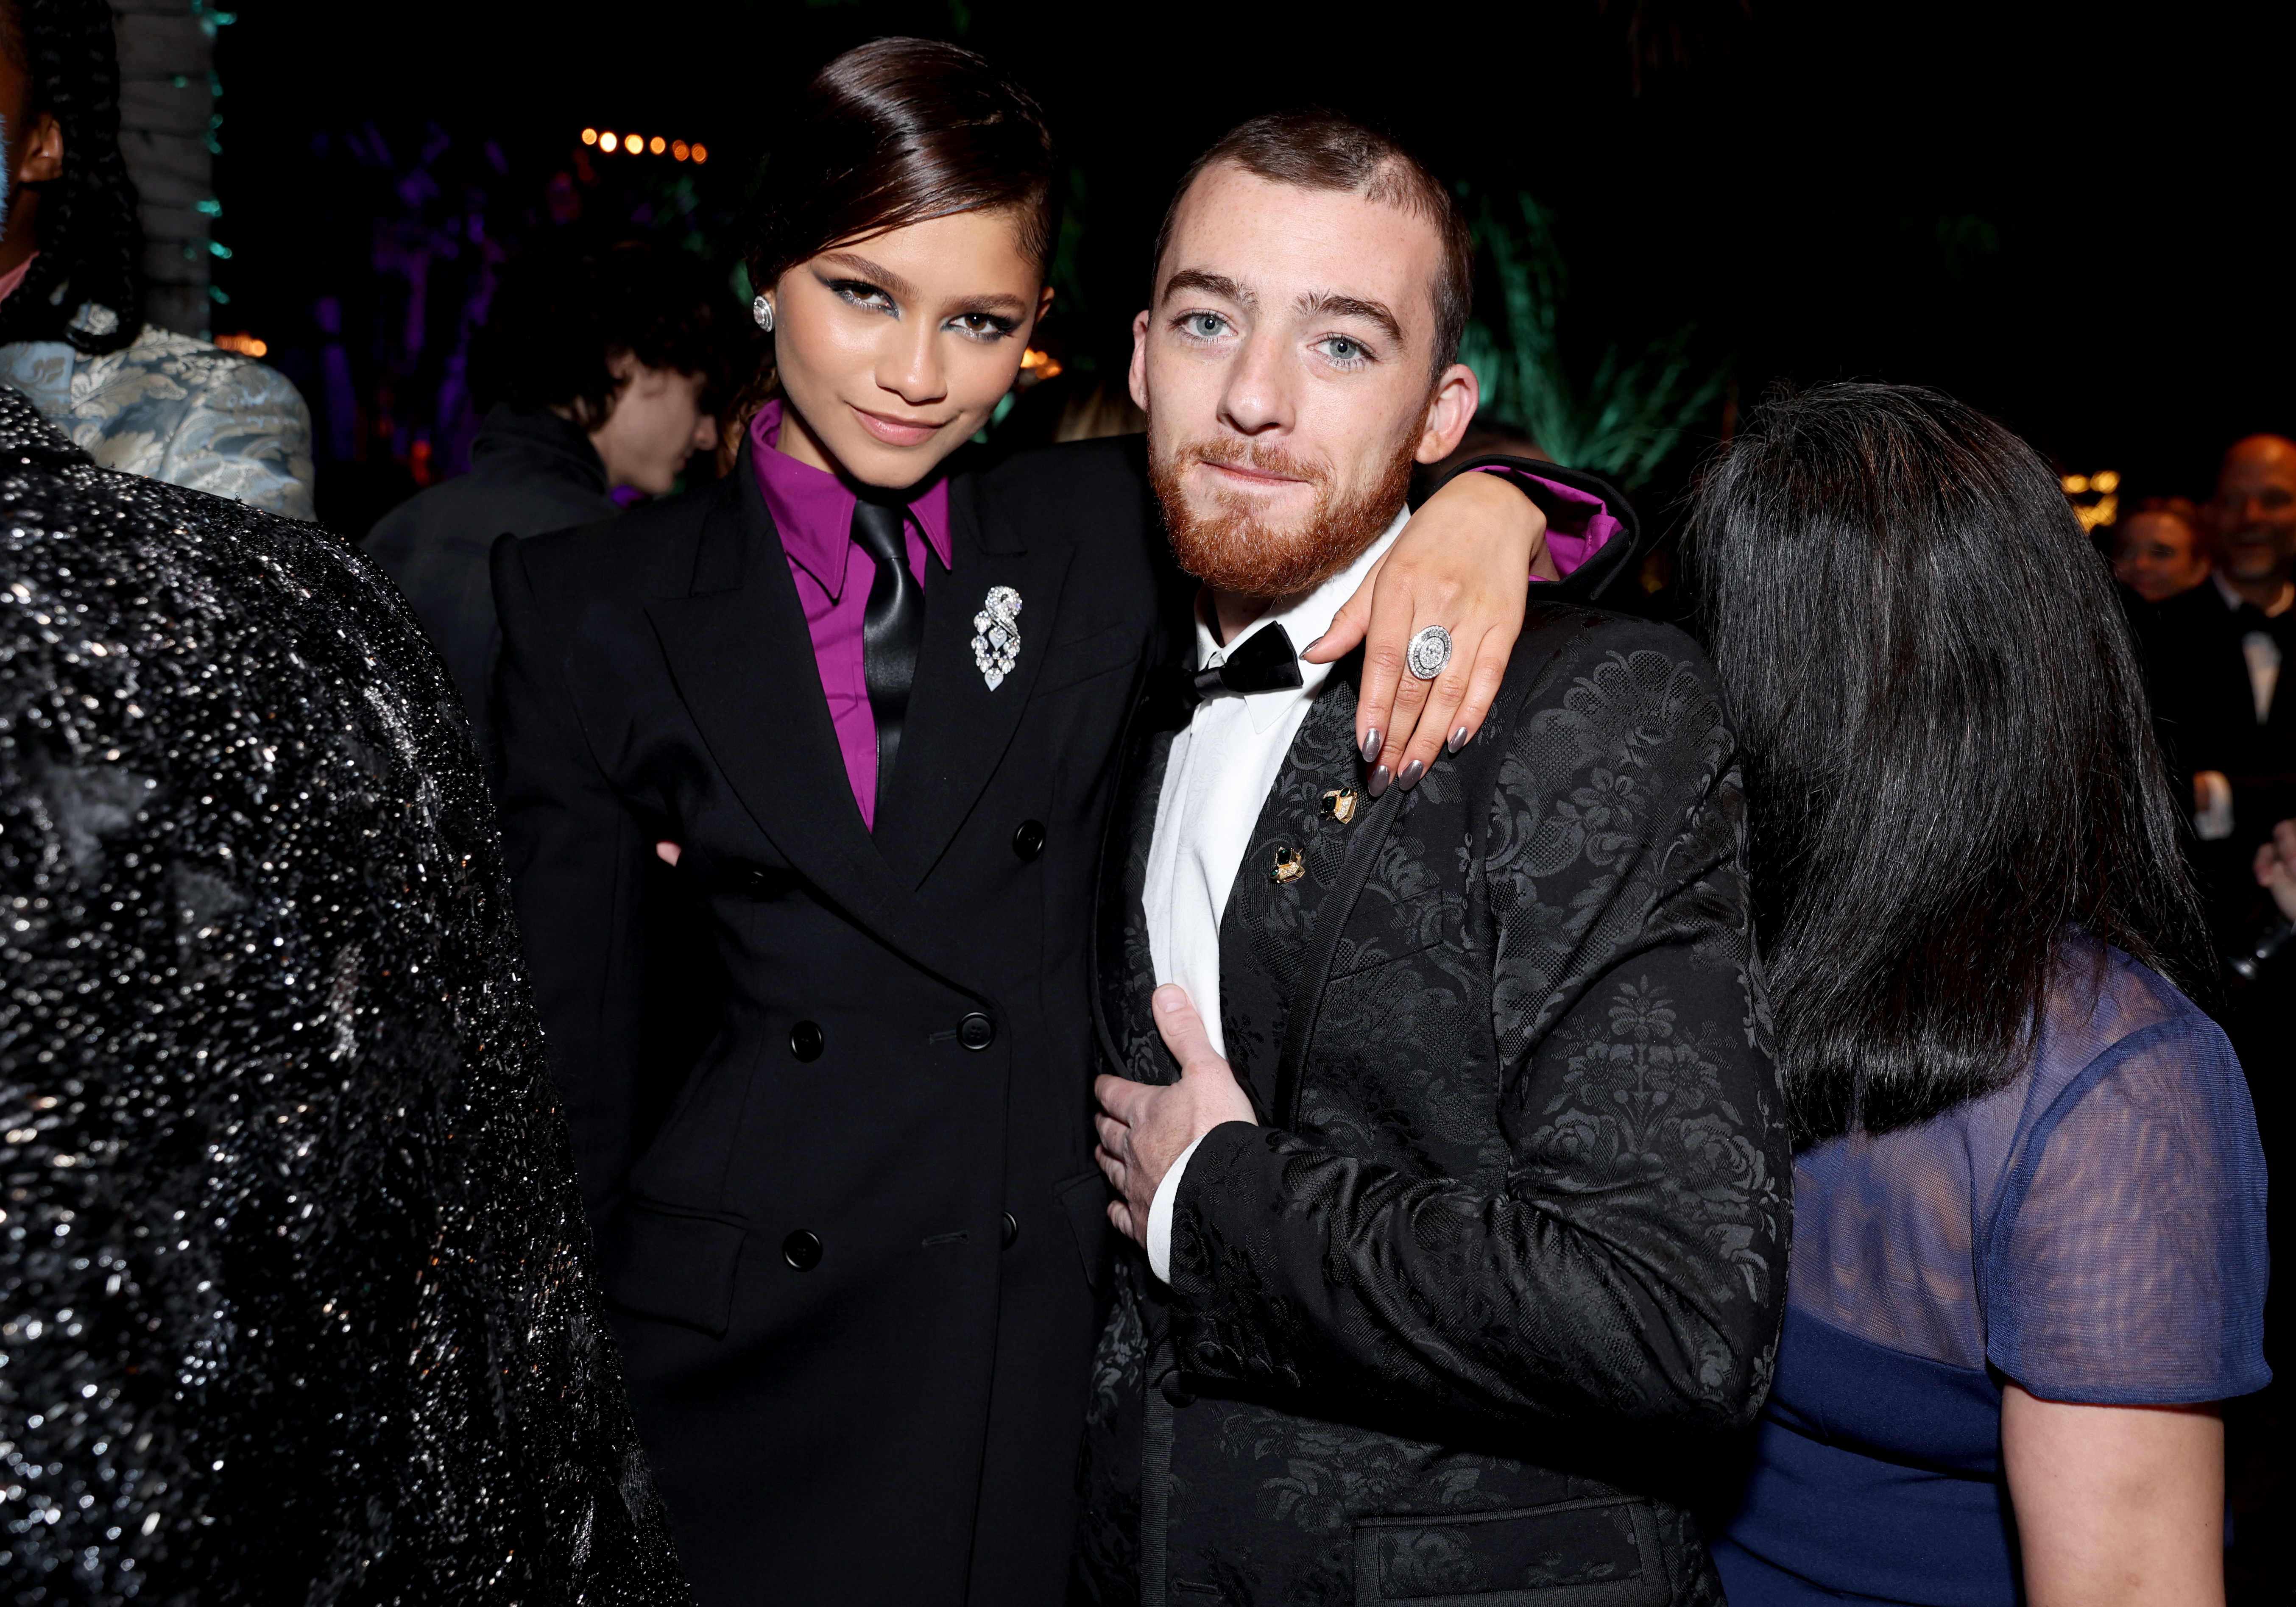 Zendaya and Angus Cloud attend the 2022 Vanity Fair Oscar Party hosted by Radhika Jones at Wallis Annenberg Center for the Performing Arts, on March 27, 2022, in Beverly Hills, California. | Source: Getty Images